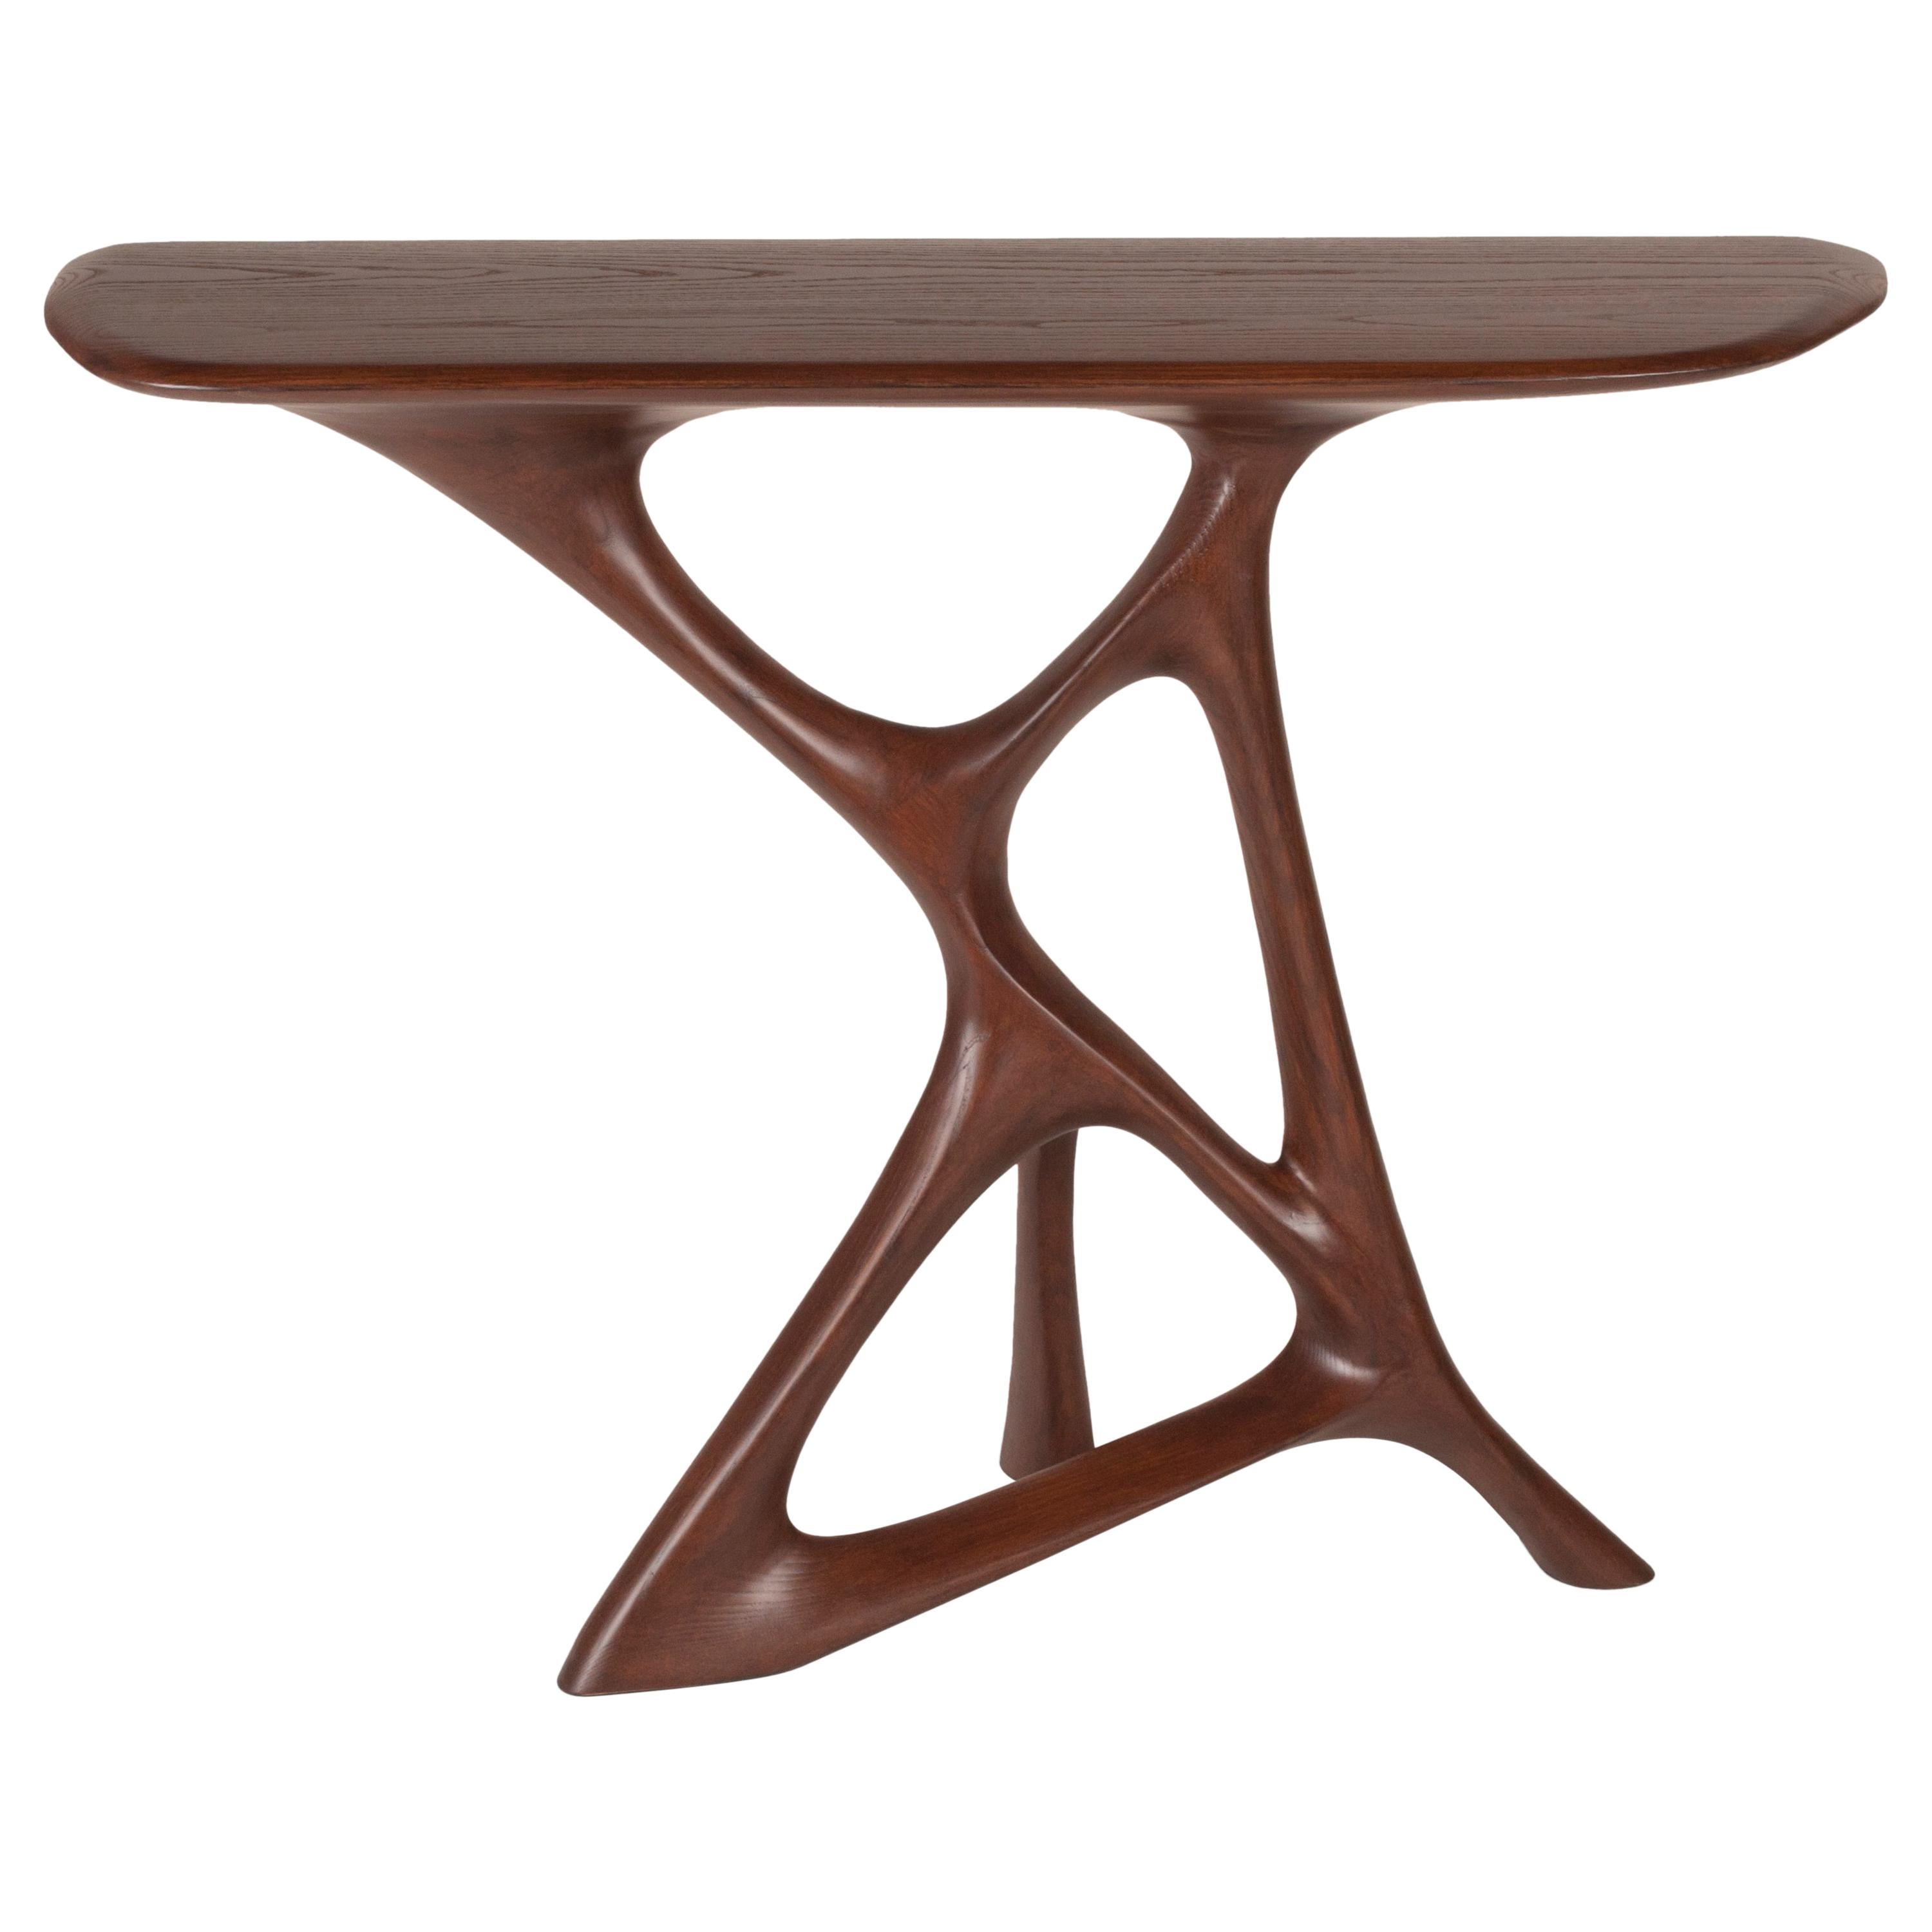 Amorph Anika Console table in Walnut stain on Ash wood For Sale